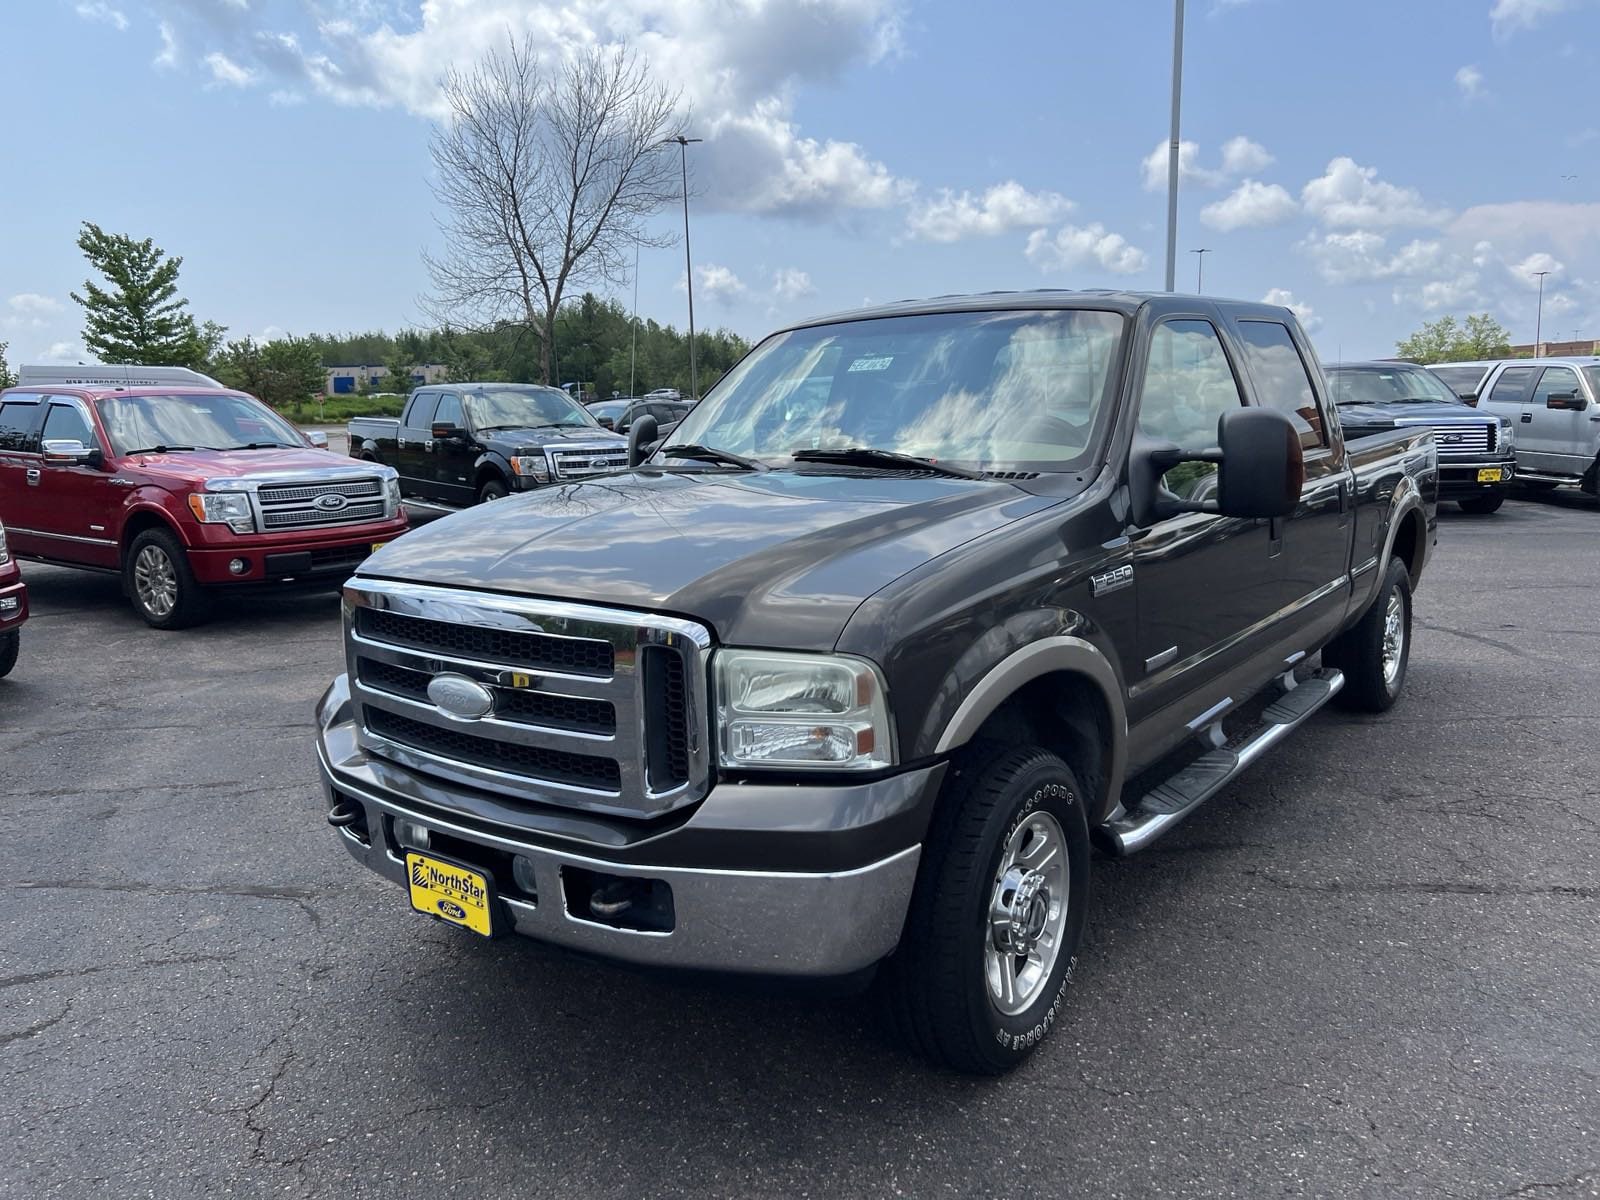 Used 2005 Ford F-250 Super Duty Lariat with VIN 1FTSW21P15EC11636 for sale in Duluth, Minnesota